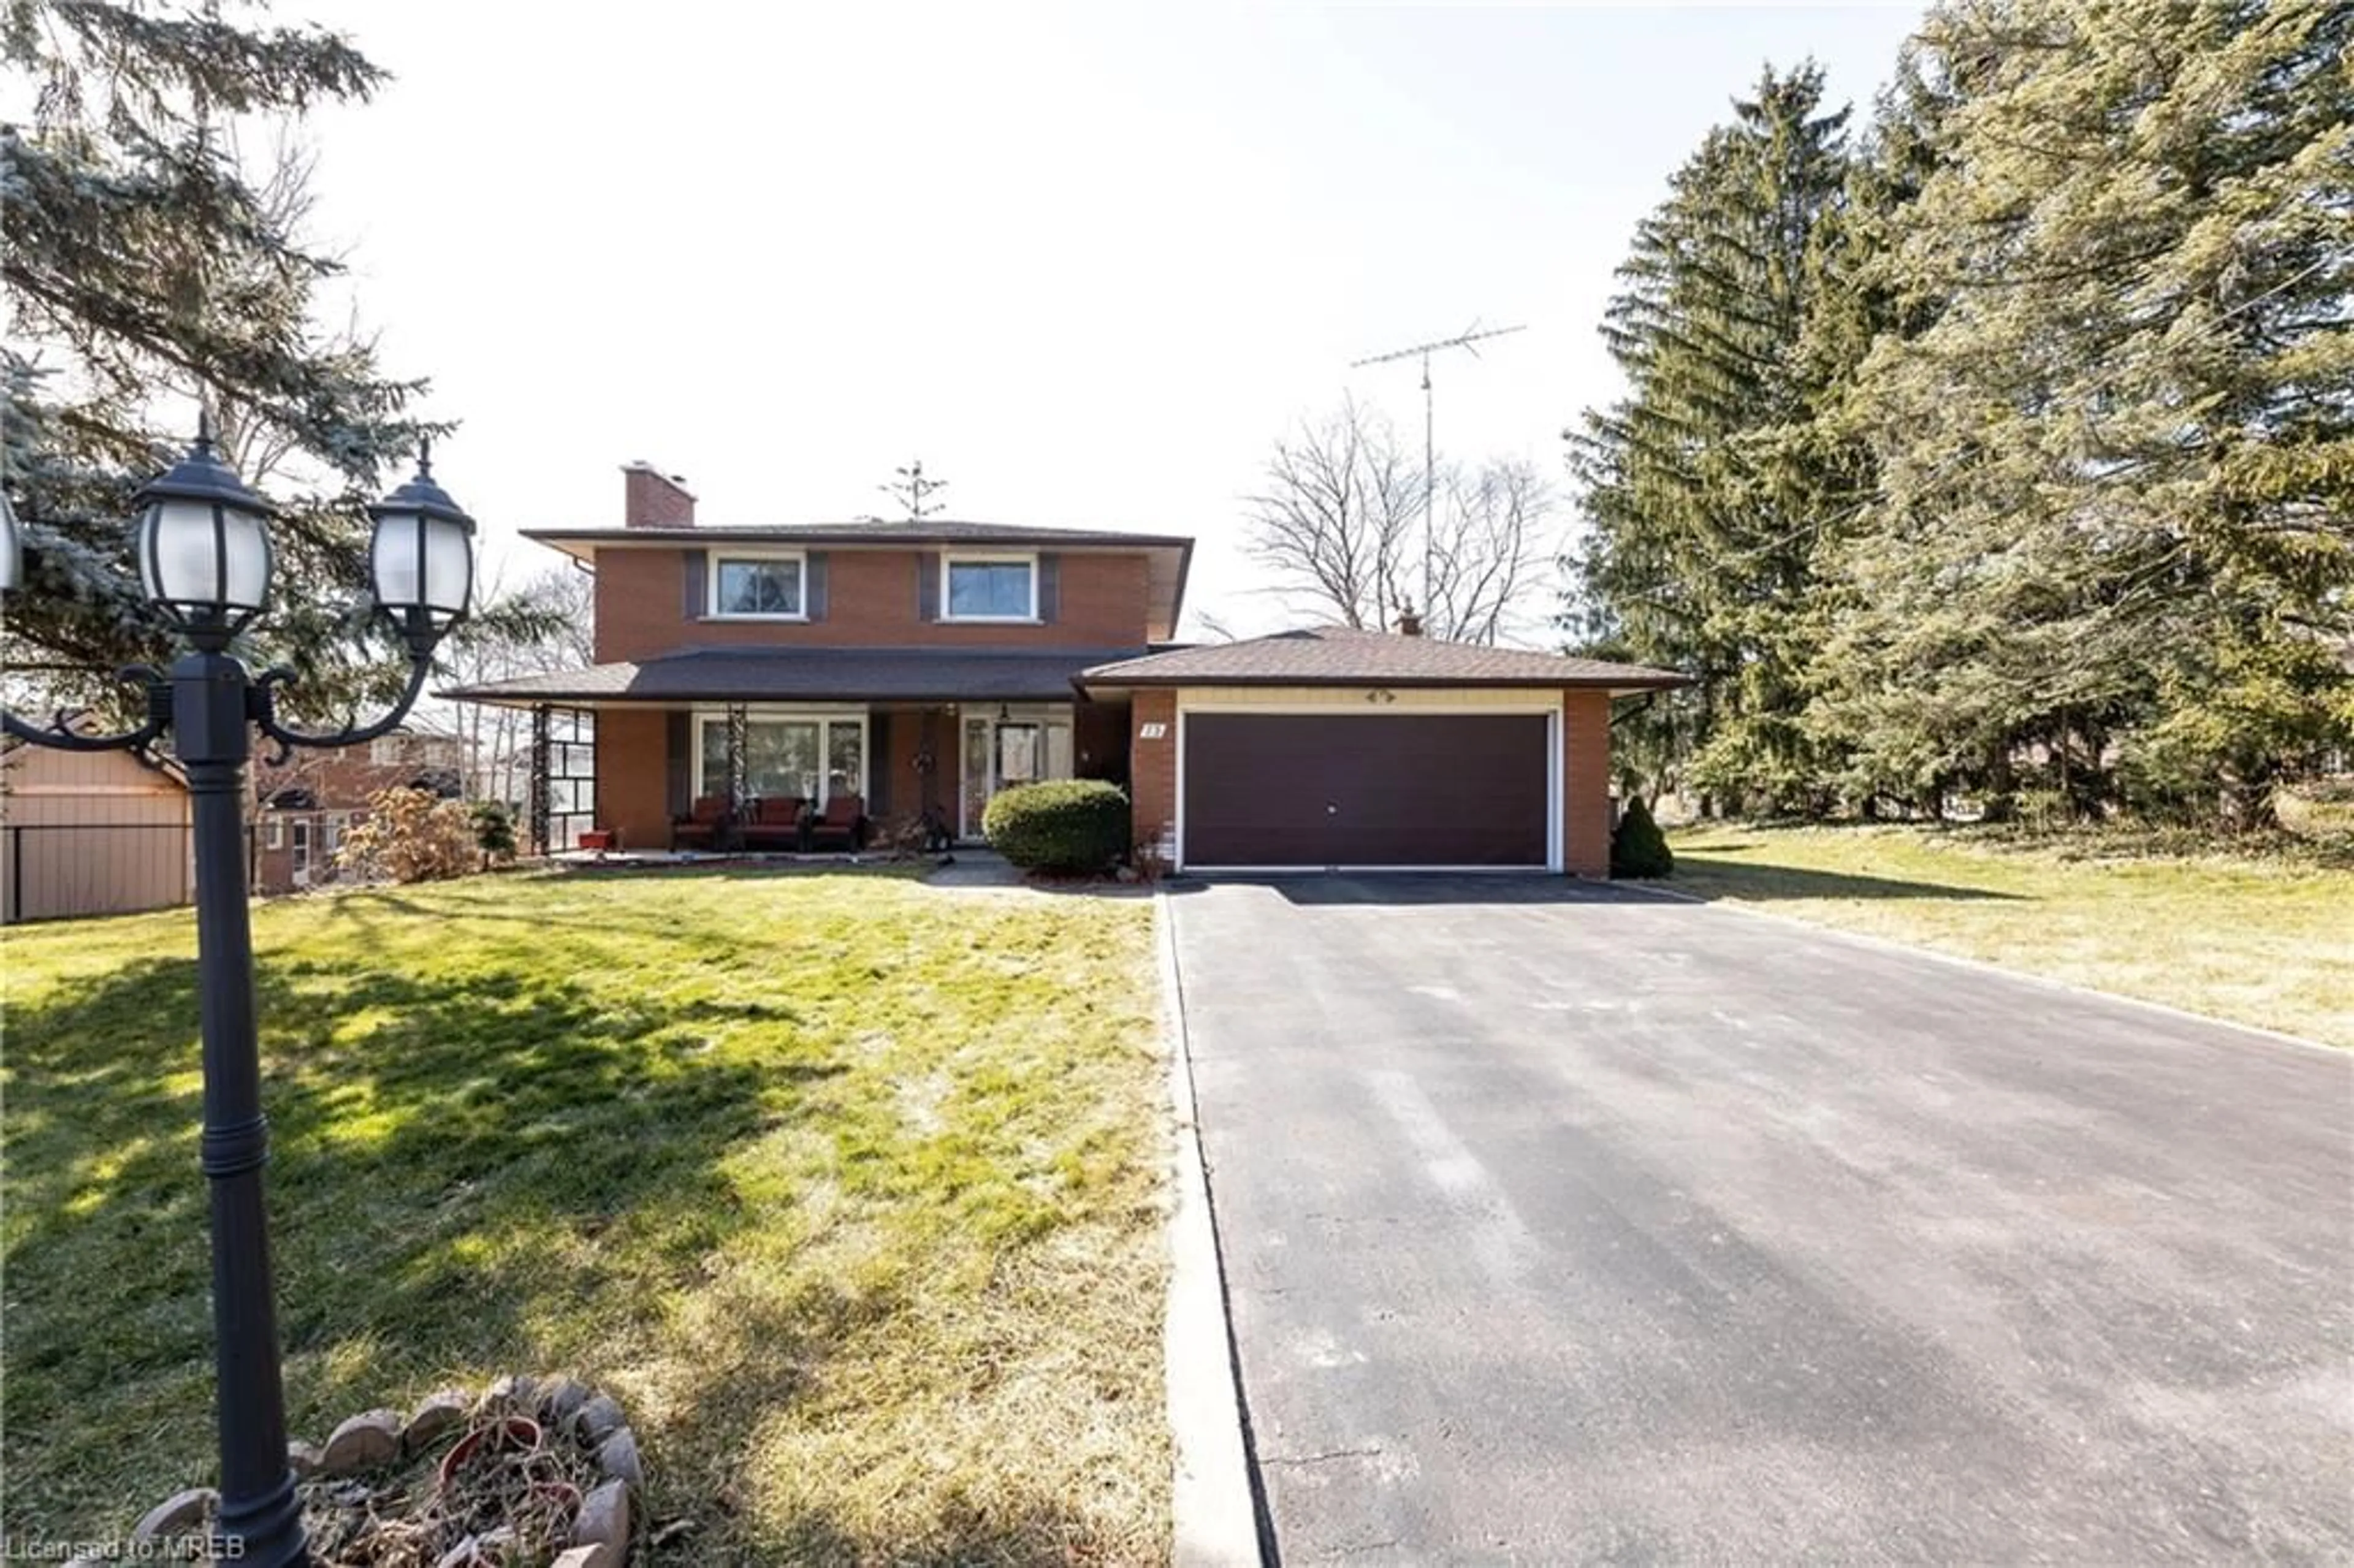 Home with brick exterior material for 73 Thomson Dr, Waterdown Ontario L8B 0G5